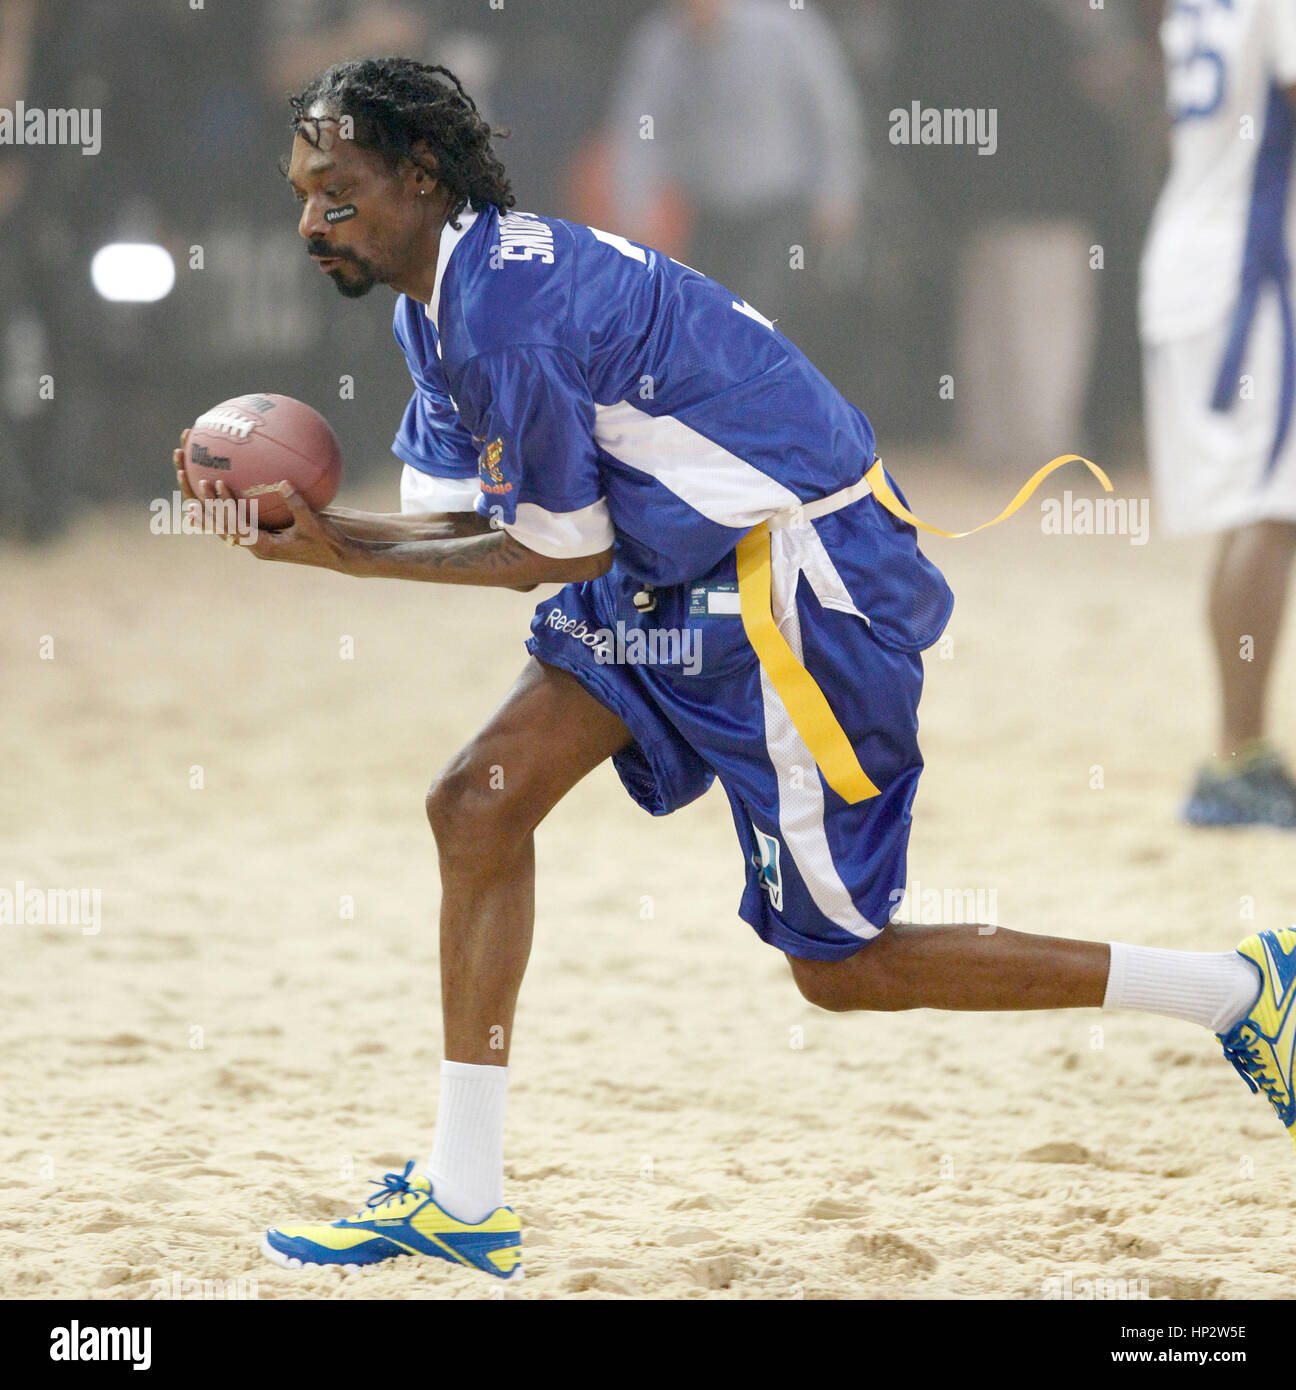 Snoop Dogg catches a football at Directv's Sixth Annual Celebrity Beach Bowl in Indianapolis, Indiana on February 4, 2012. Photo by Francis Specker Stock Photo